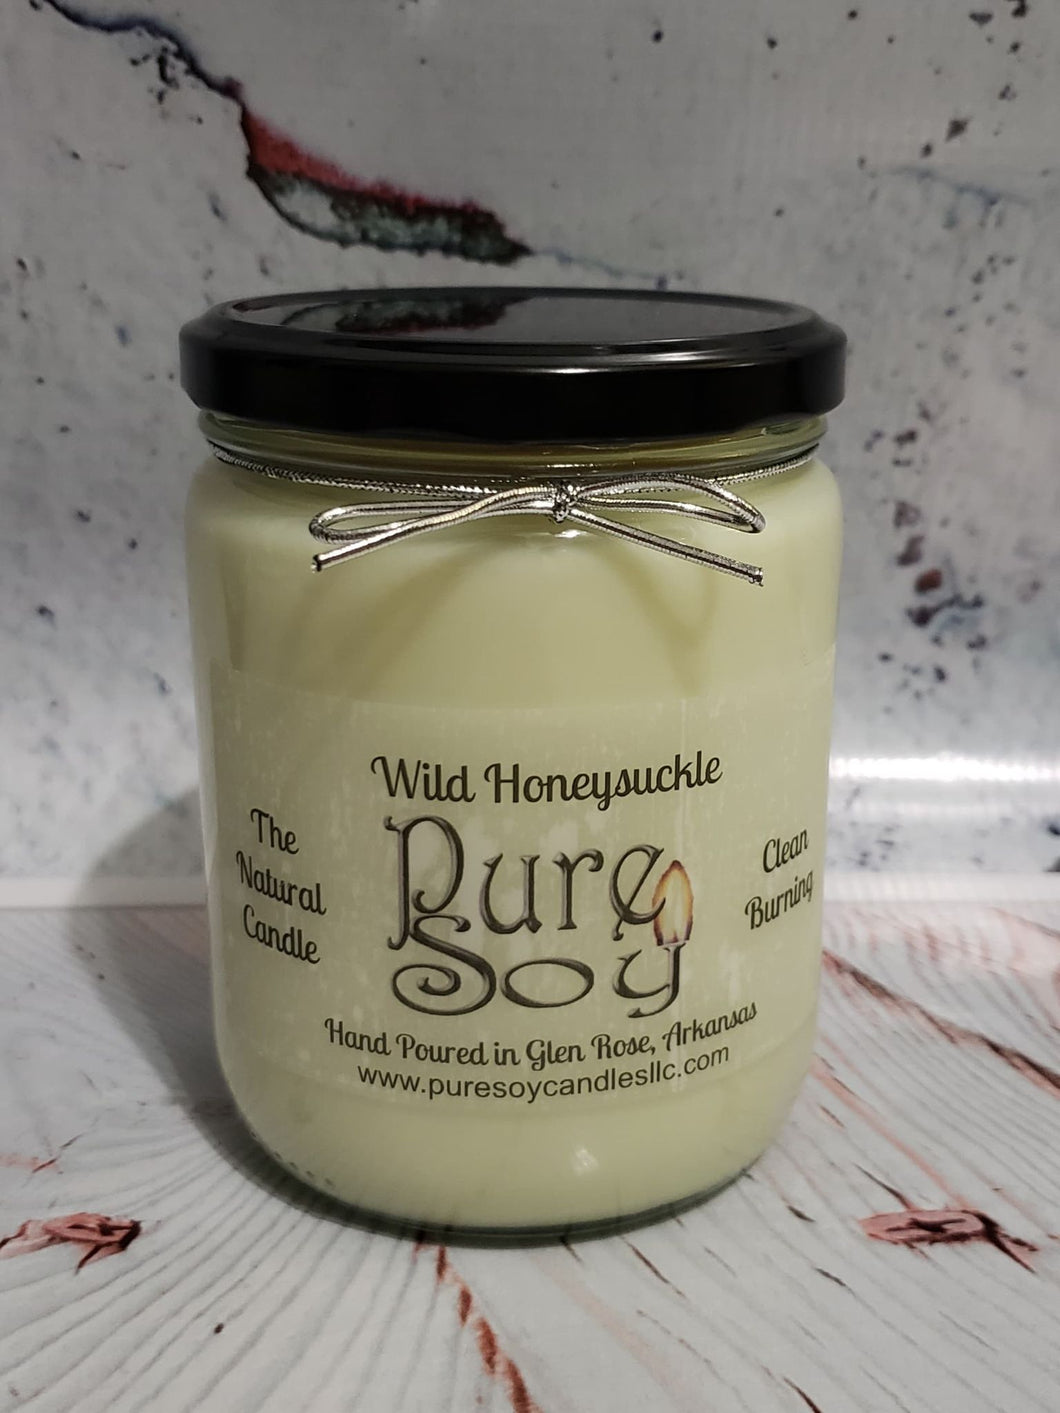 MEDIUM CLASSIC SOY CANDLE - APPROX. 8 OZ